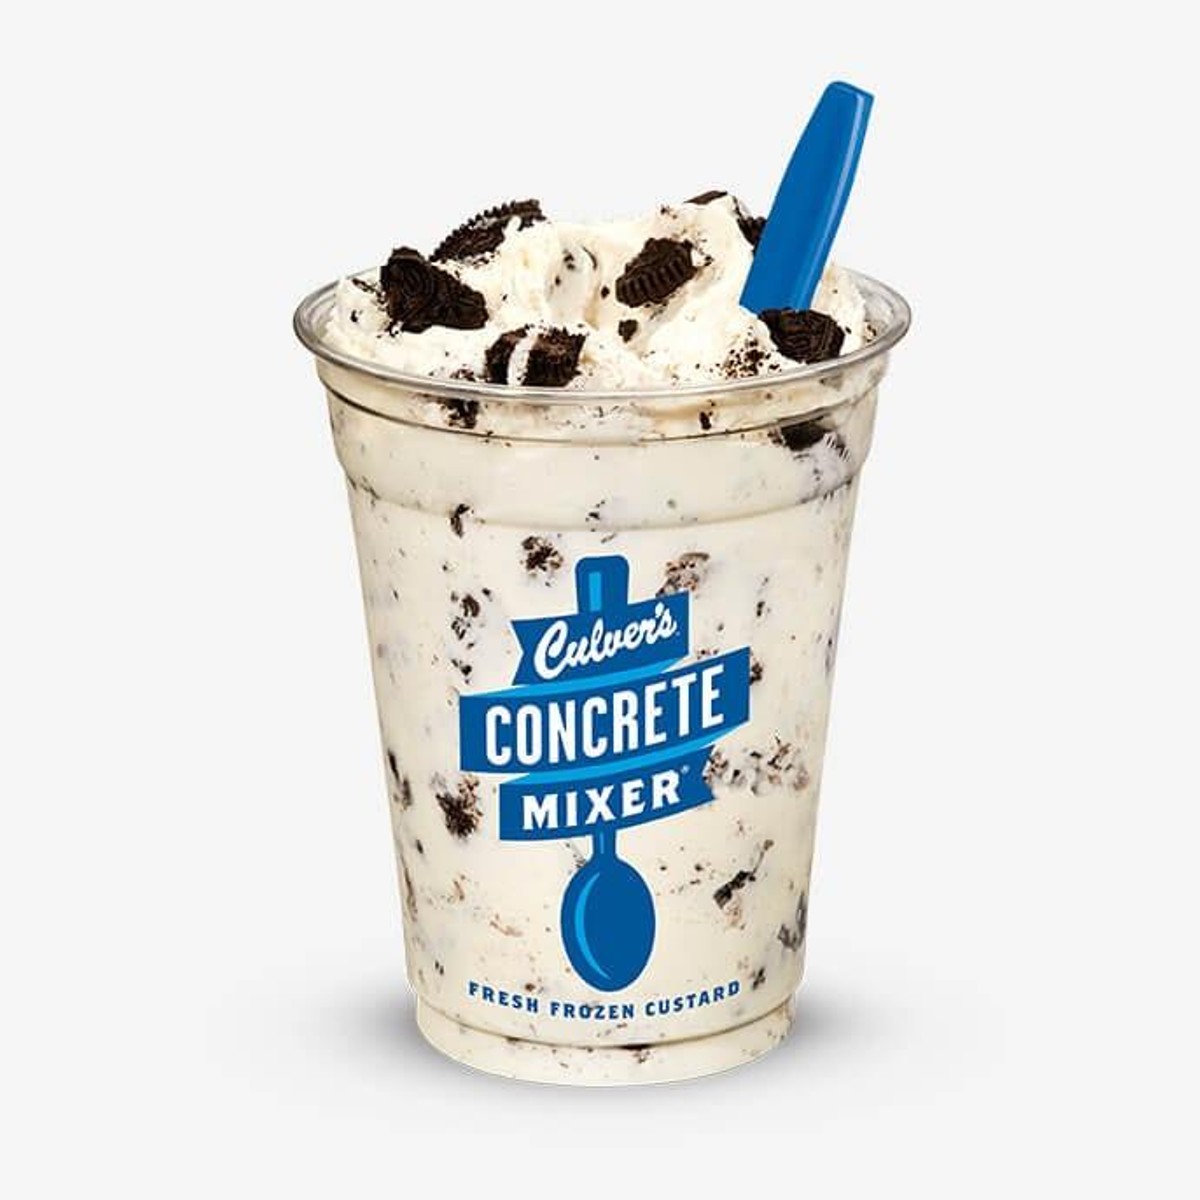 Culver's Is Launching a New Concrete Mixer for the Holidays